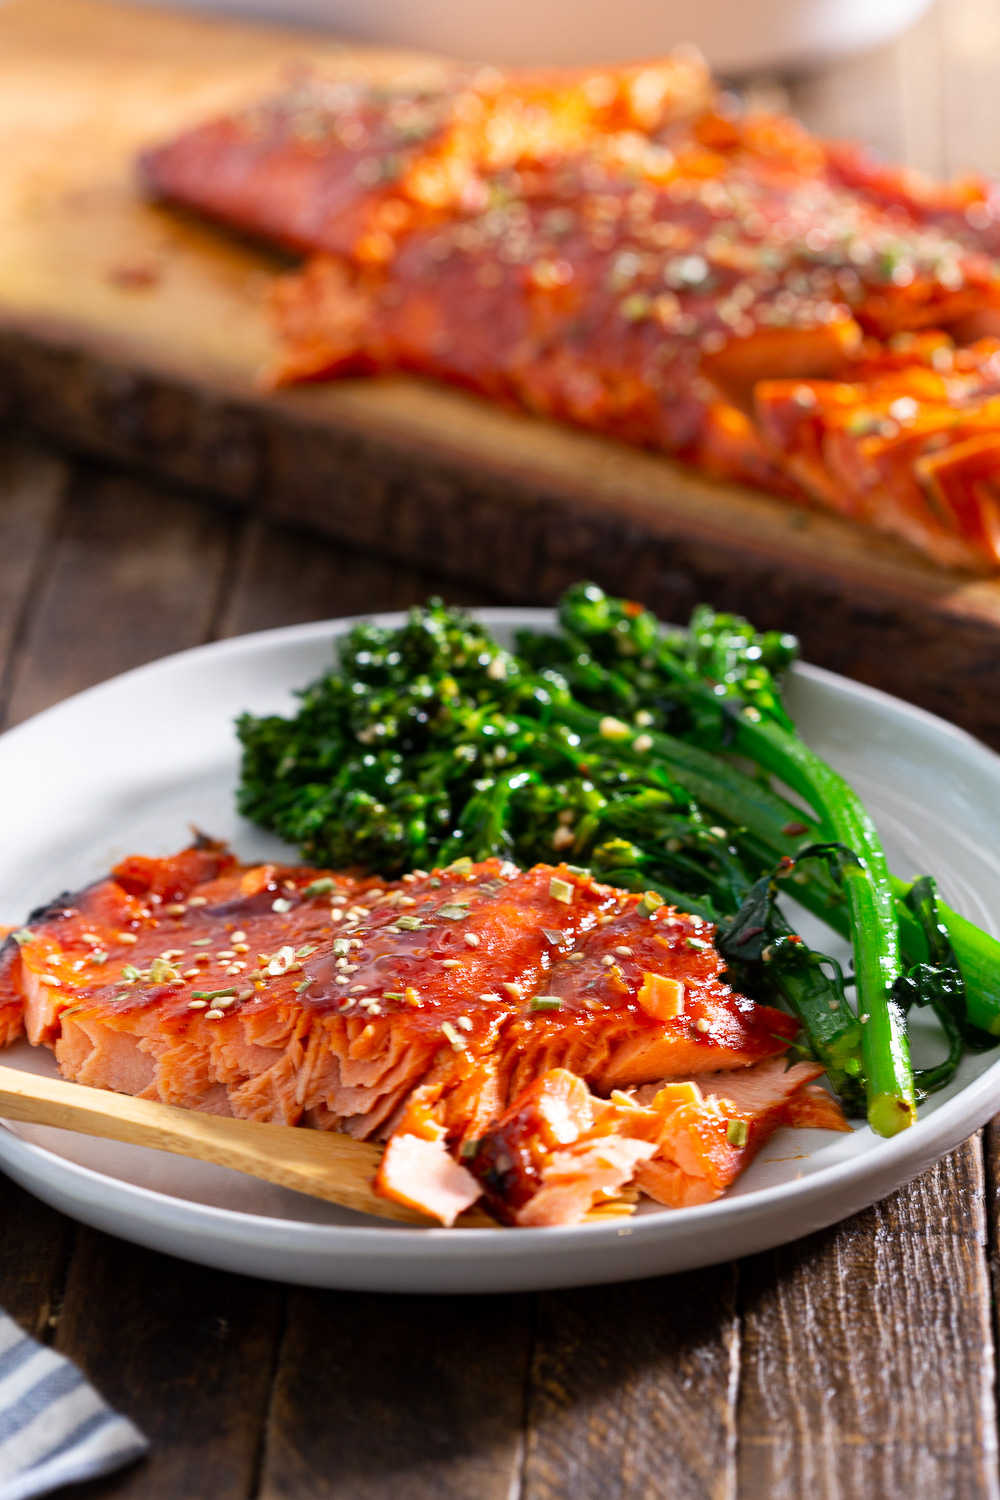 Serving garlic broccolini with salmon for a simple meal